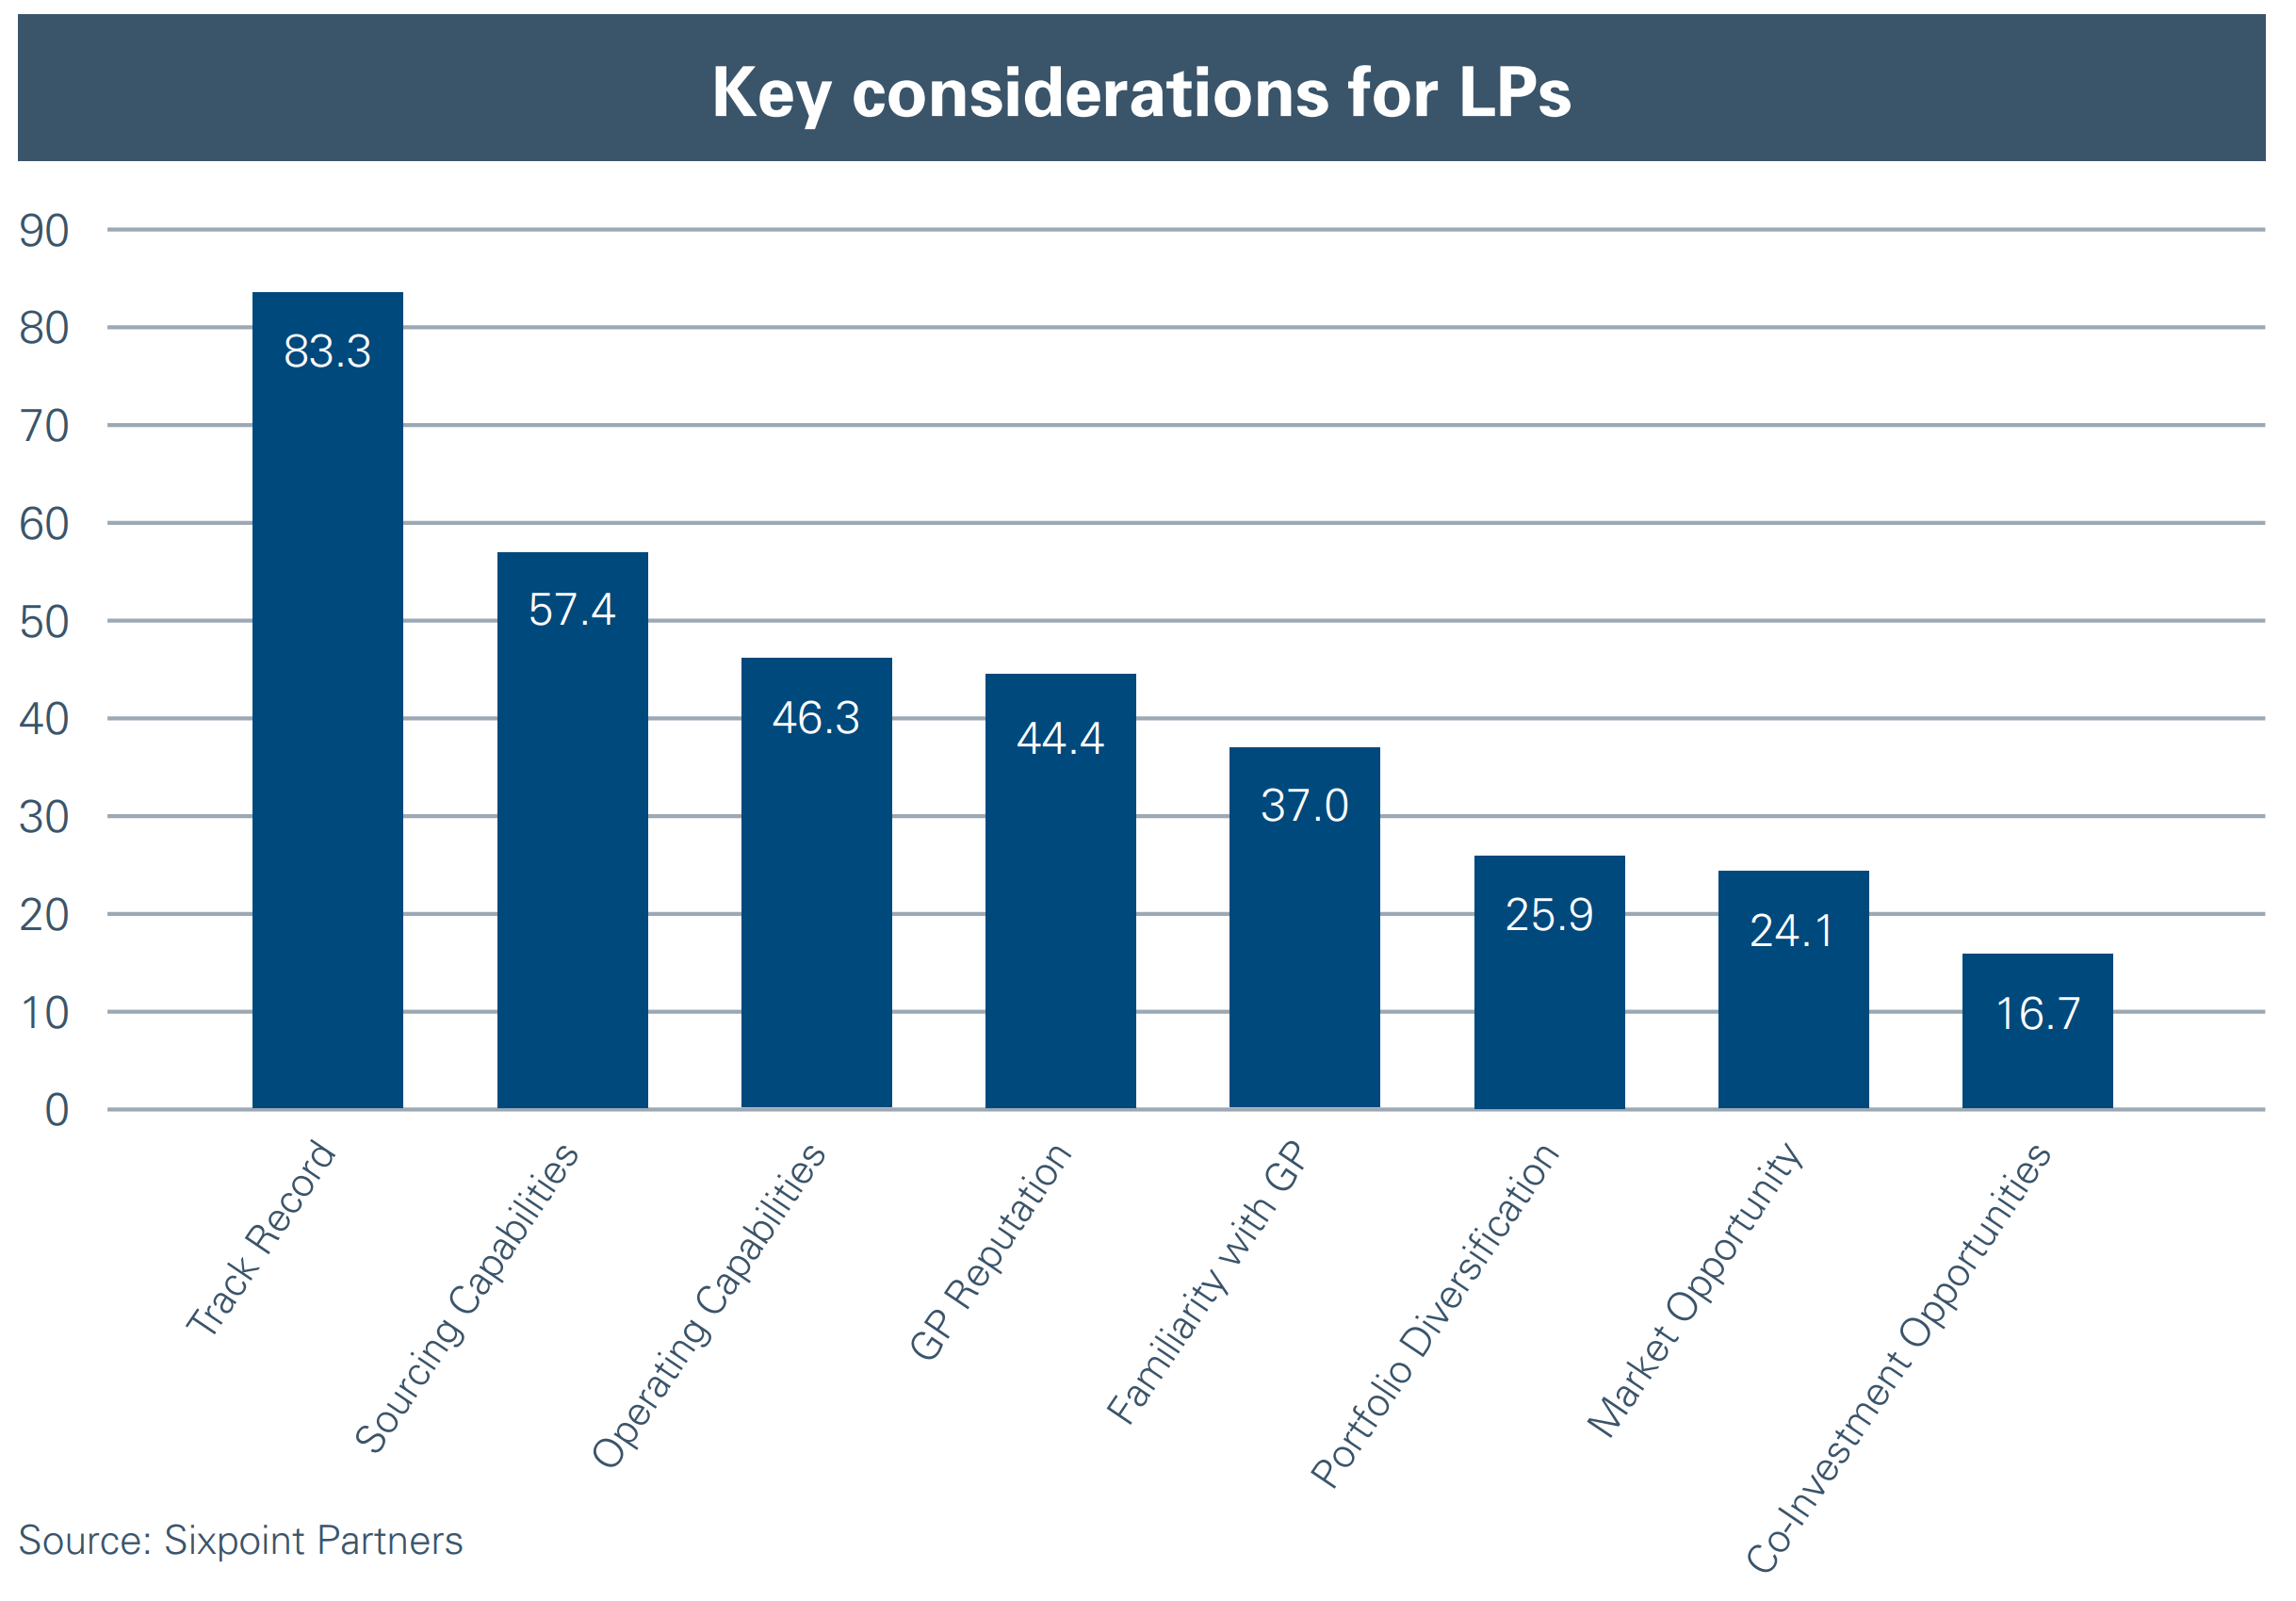 Key considerations for LPs